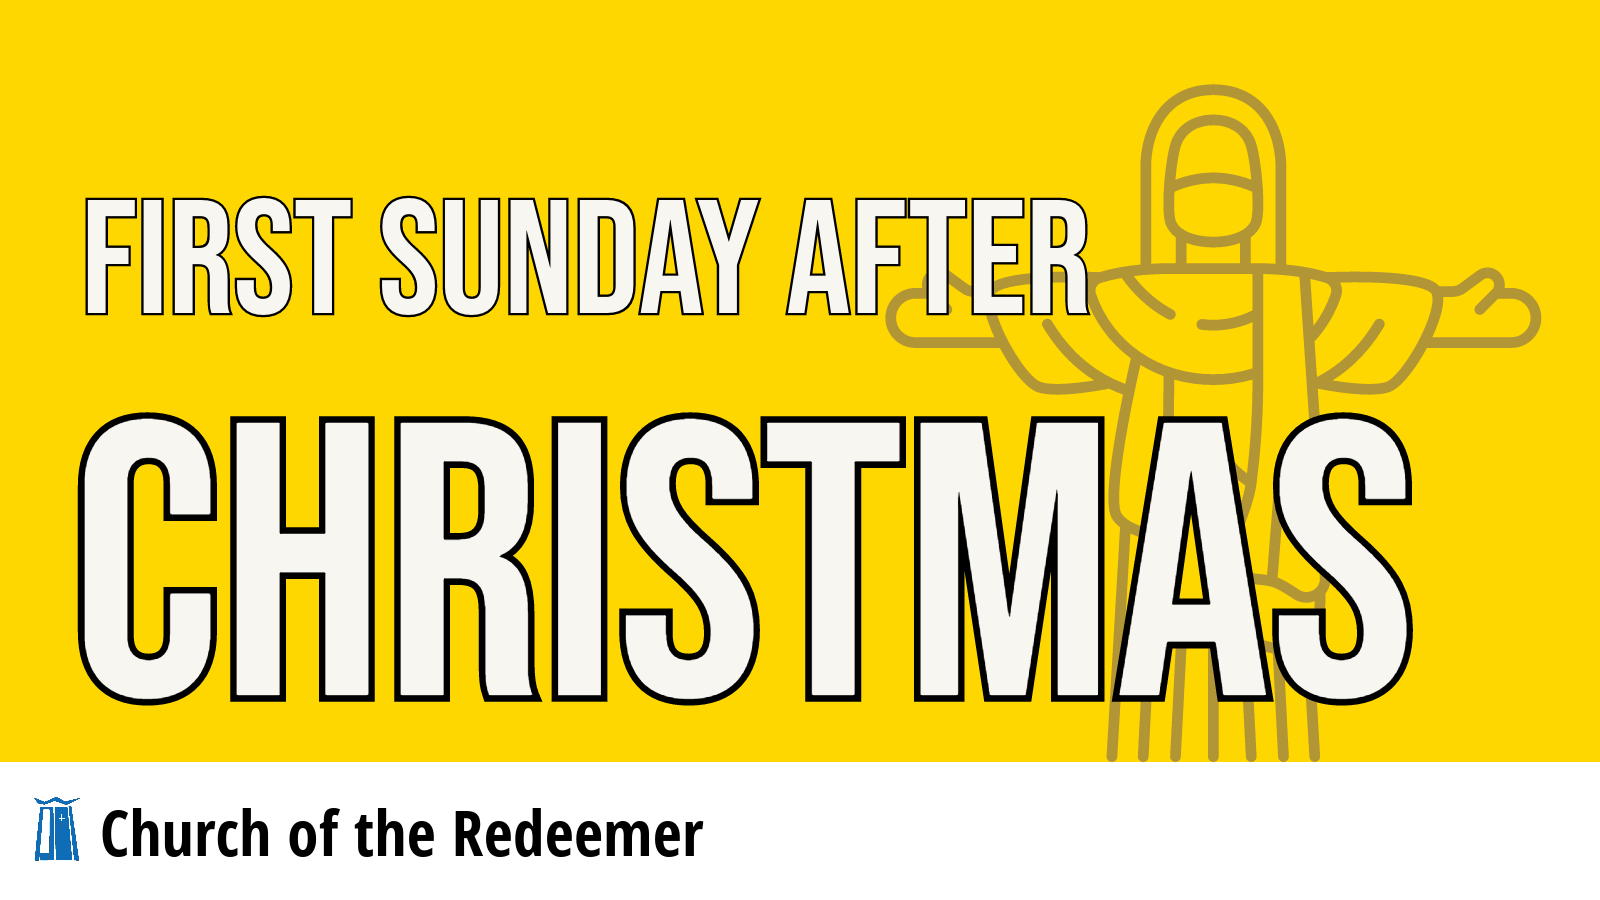 The First Sunday after Christmas